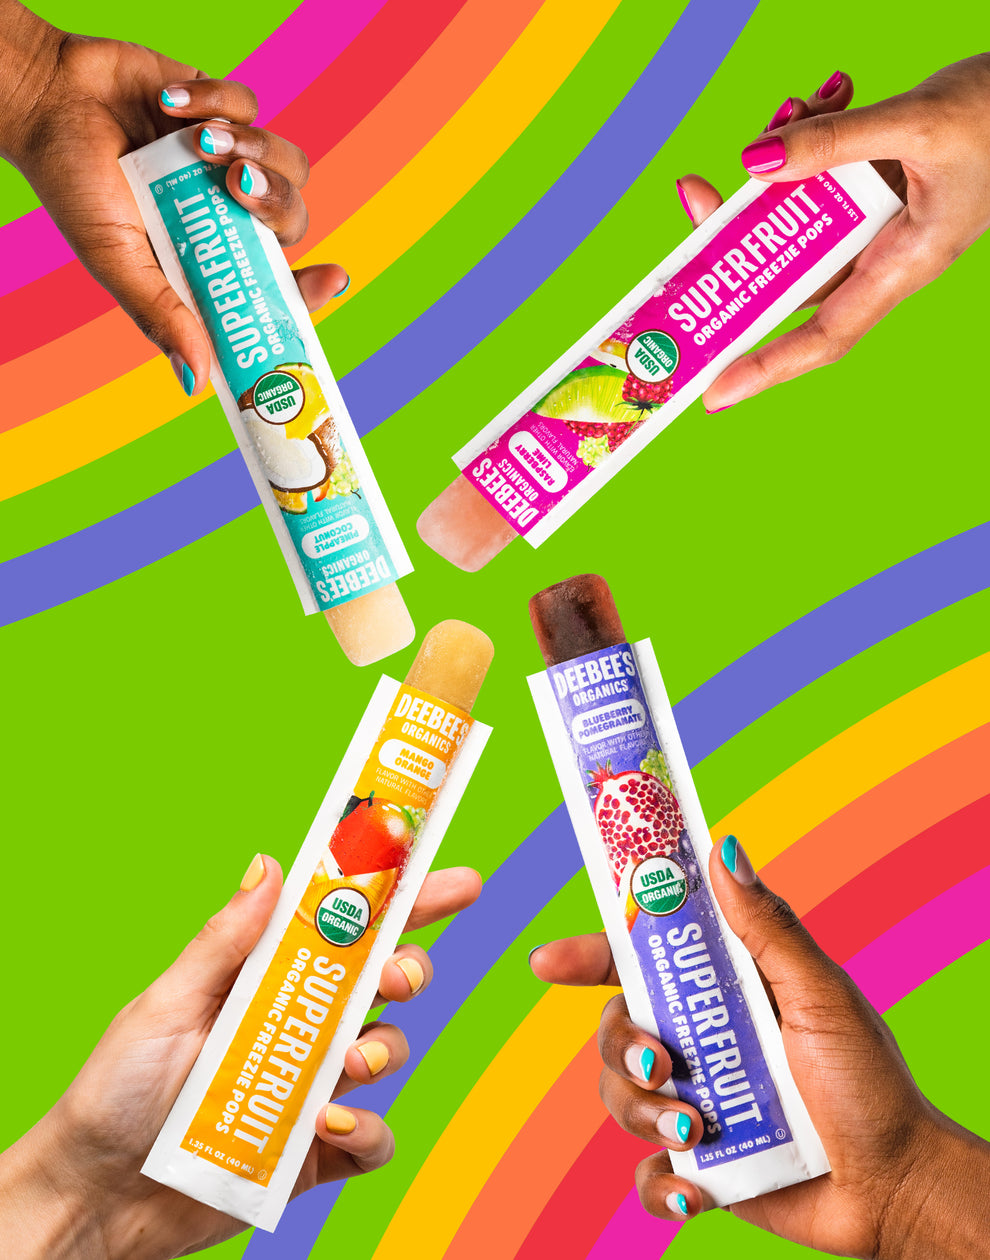 Four hands each holding a DeeBees Organics SuperFruit Freezie Pop on a green background with illustrated rainbows